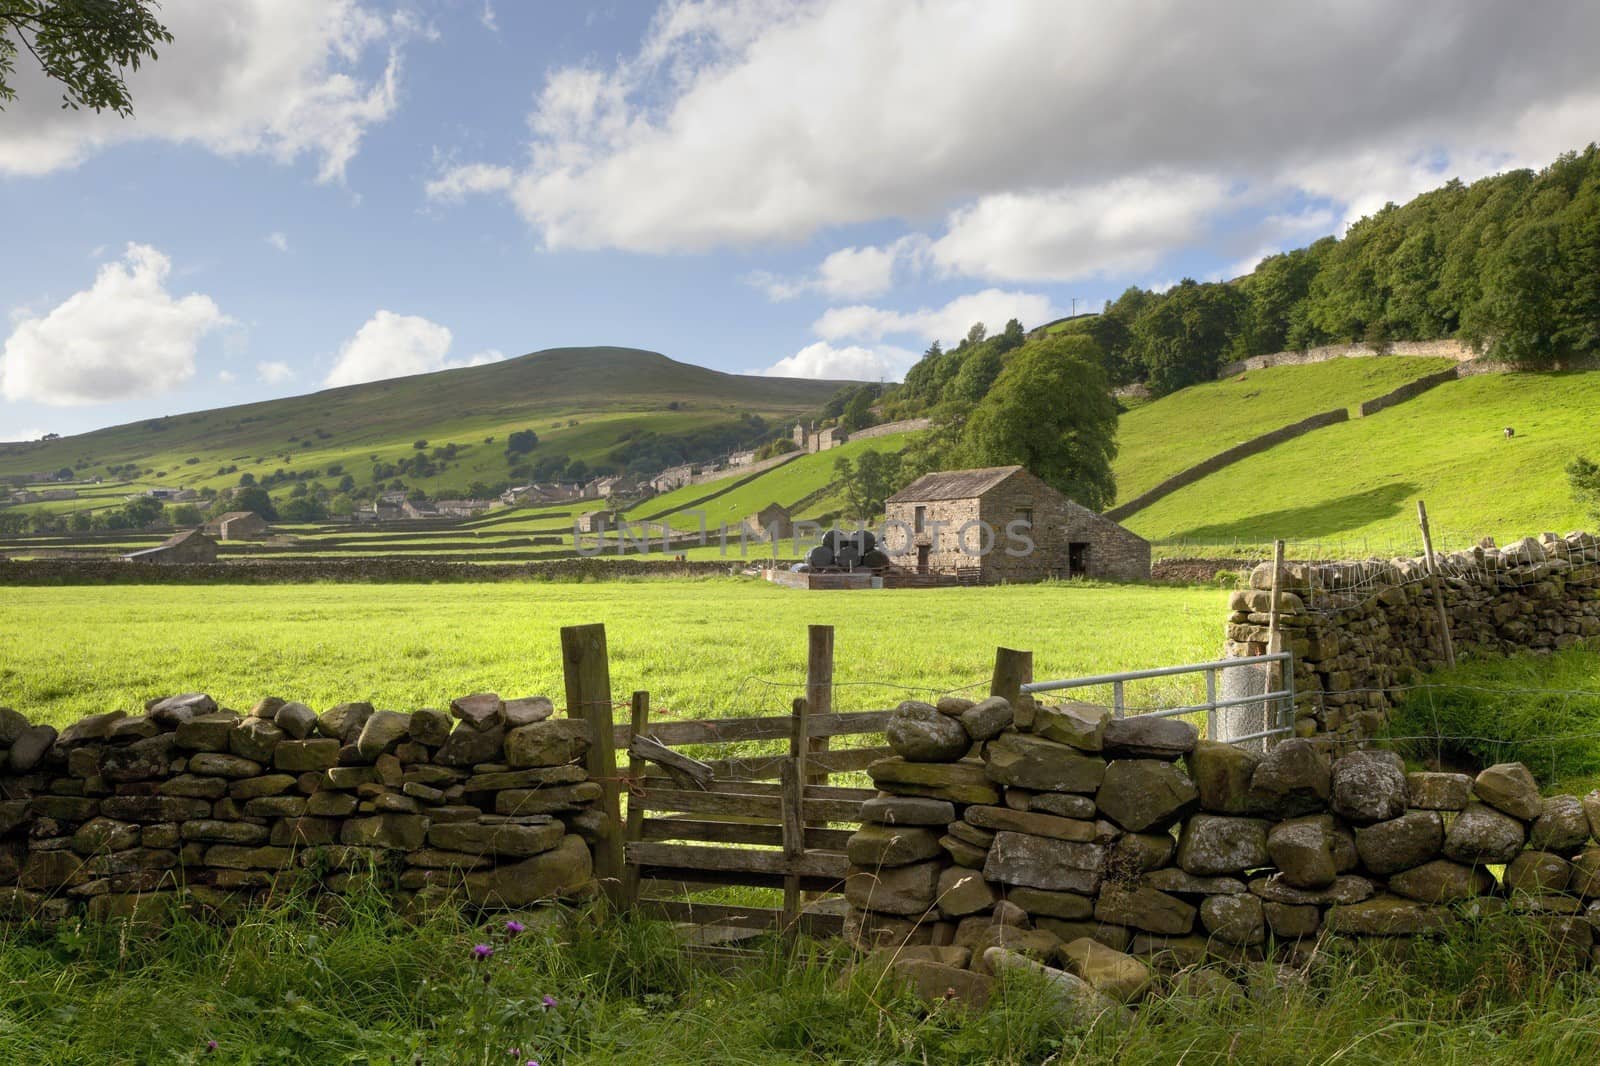 Looking over an old stone wall towards Gunnerside, Swaledale, Yorkshire Dales, England.